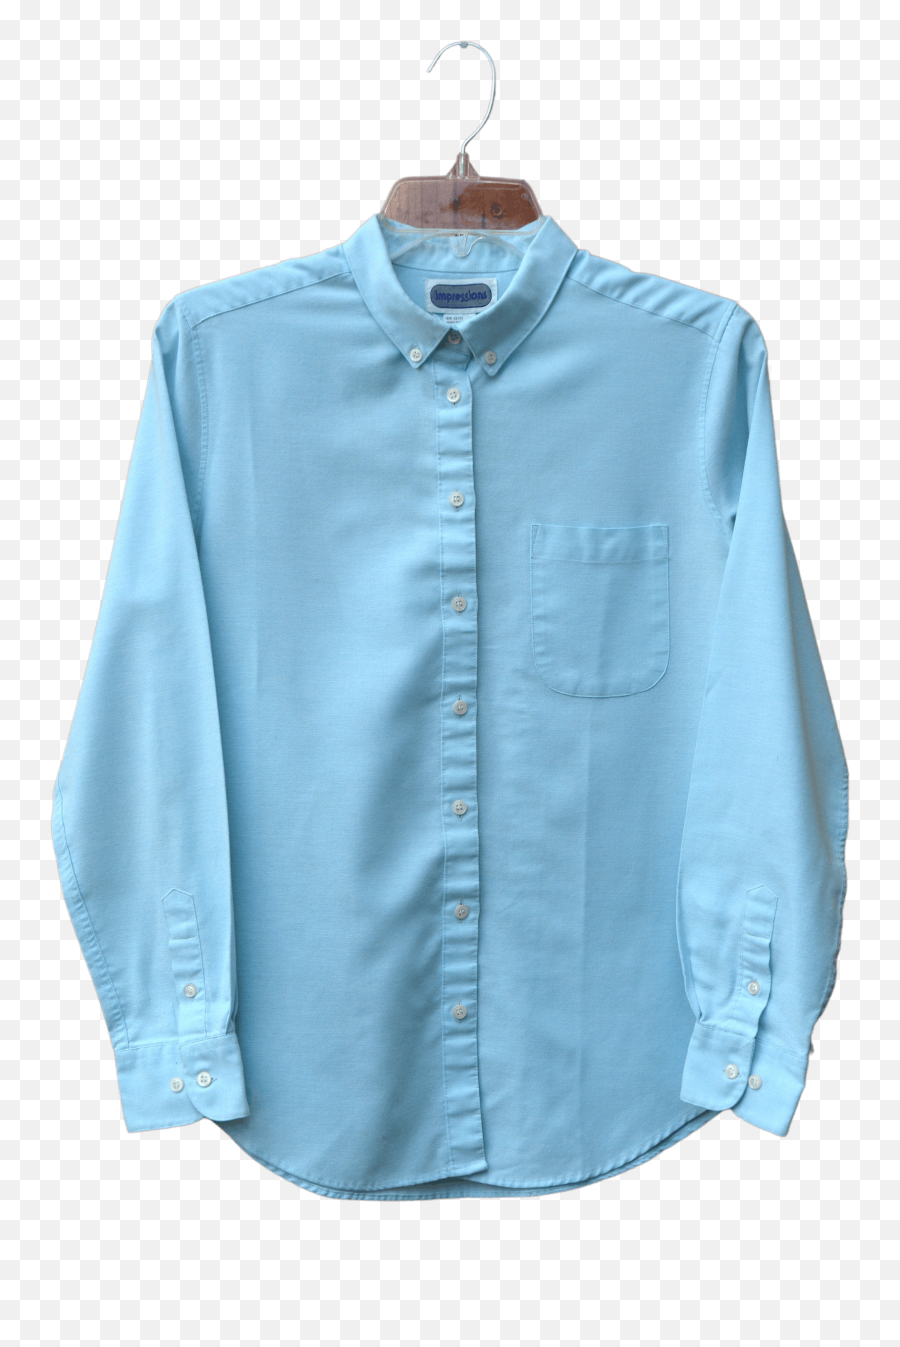 Blue Oxford Long Sleeve Shirt - Long Sleeve Emoji,A Dress, Shirt And Tie, Jeans And A Horse Emoticon